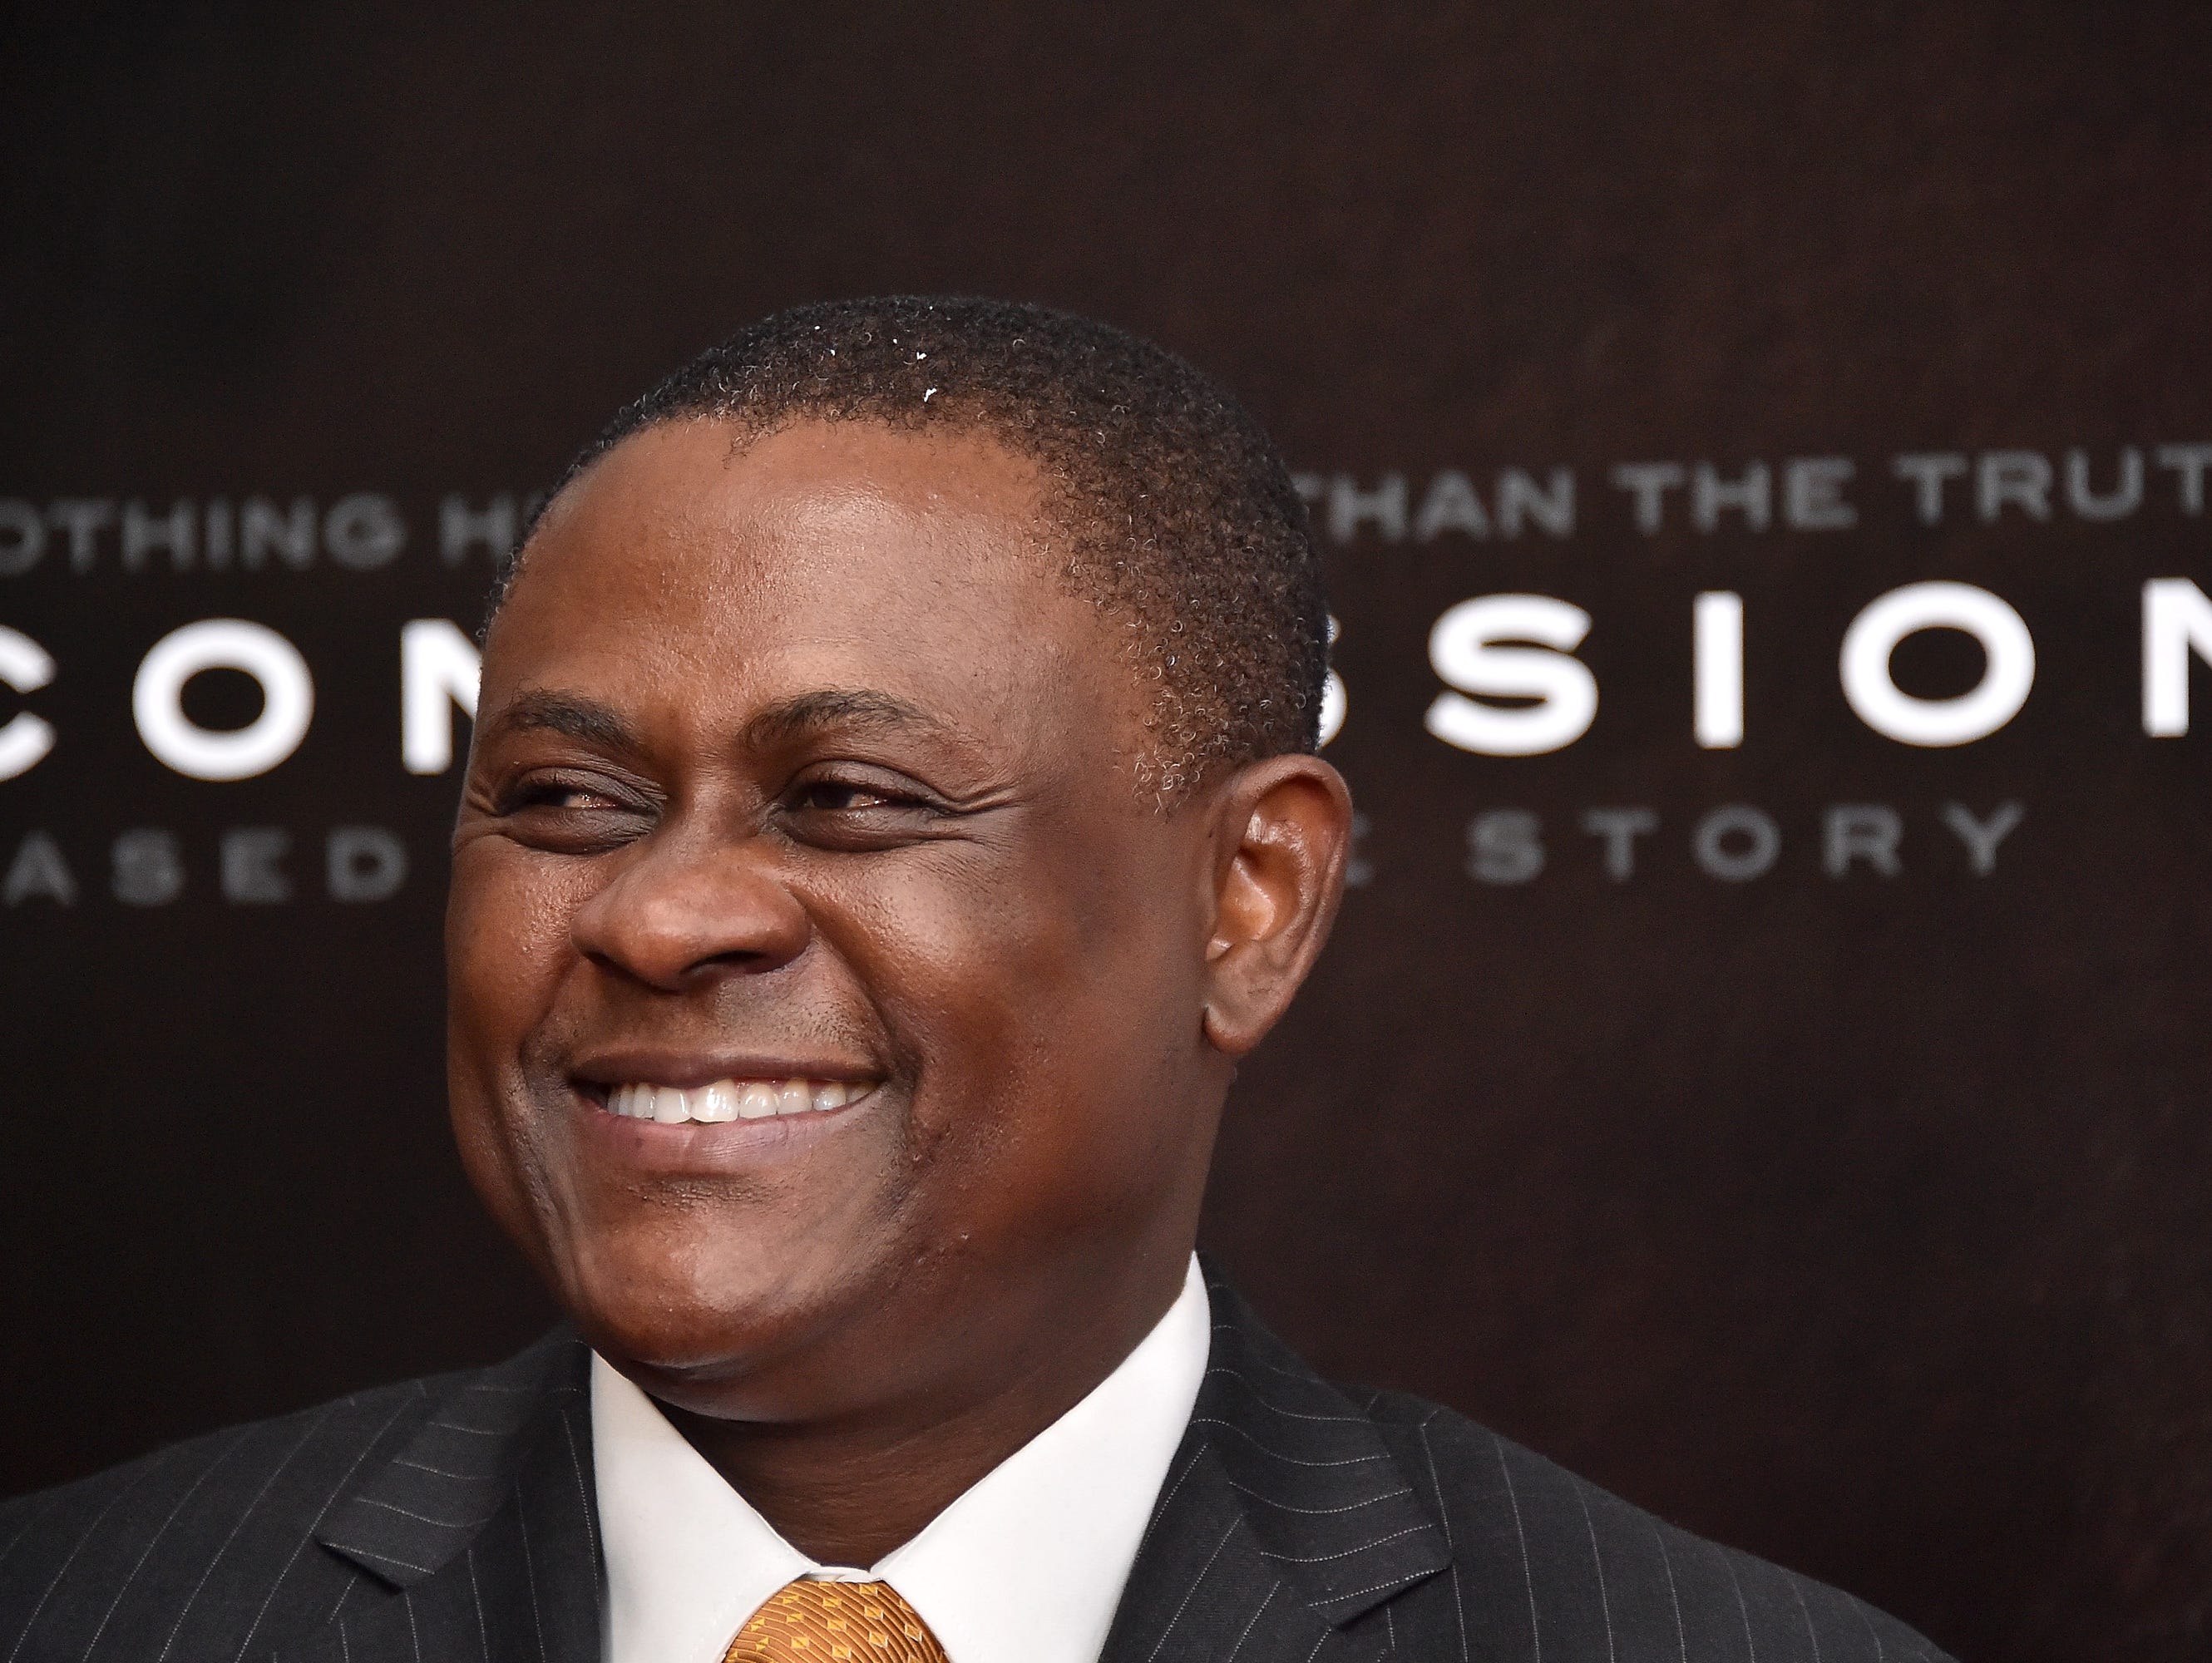 Dr. Bennet Omalu attends the"Concussion" New York Premiere at AMC Loews Lincoln Square on December 16, 2015 in New York City. (Photo by Mike Coppola/Getty Images)